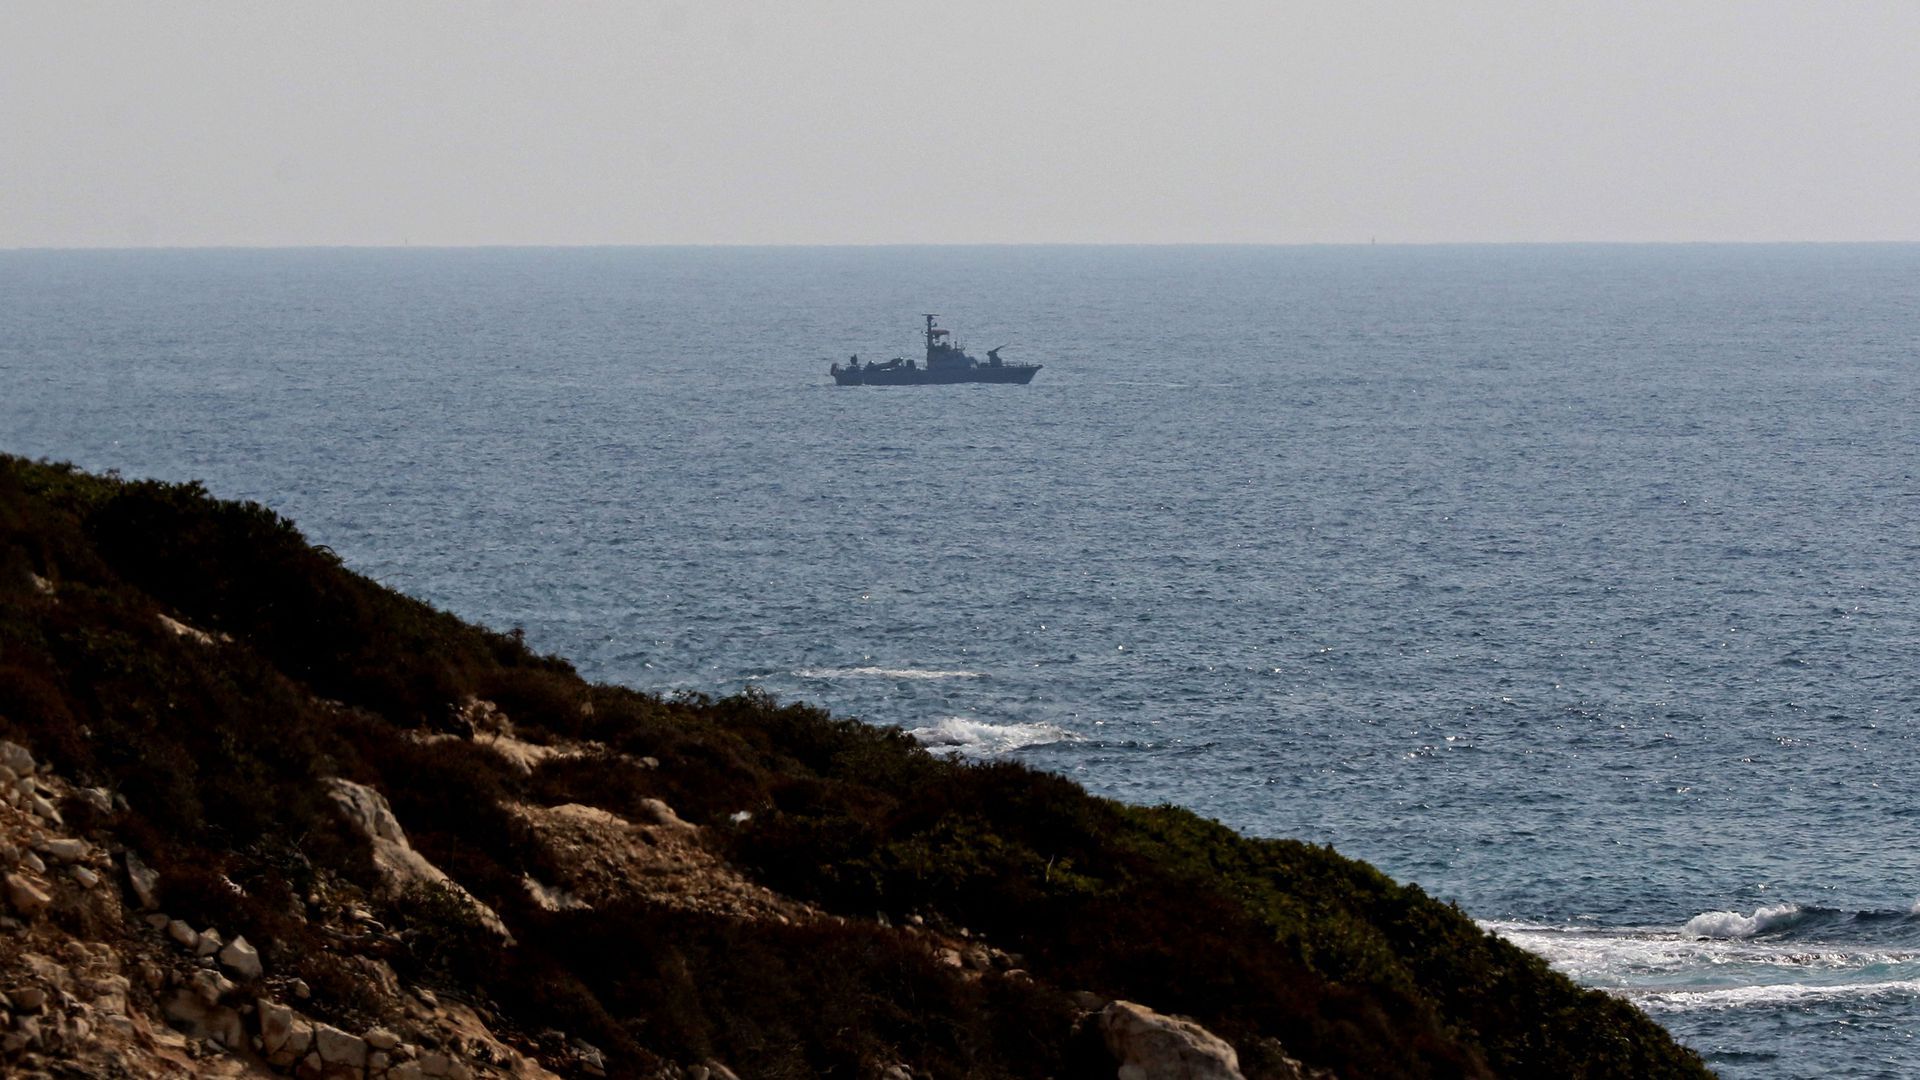 An Israeli navy vessel patrols in the Mediterranean Sea at the maritime border between Israel and Lebanon on Sept. 4. Photo: Mahmoud Zayyat/AFP via Getty Images